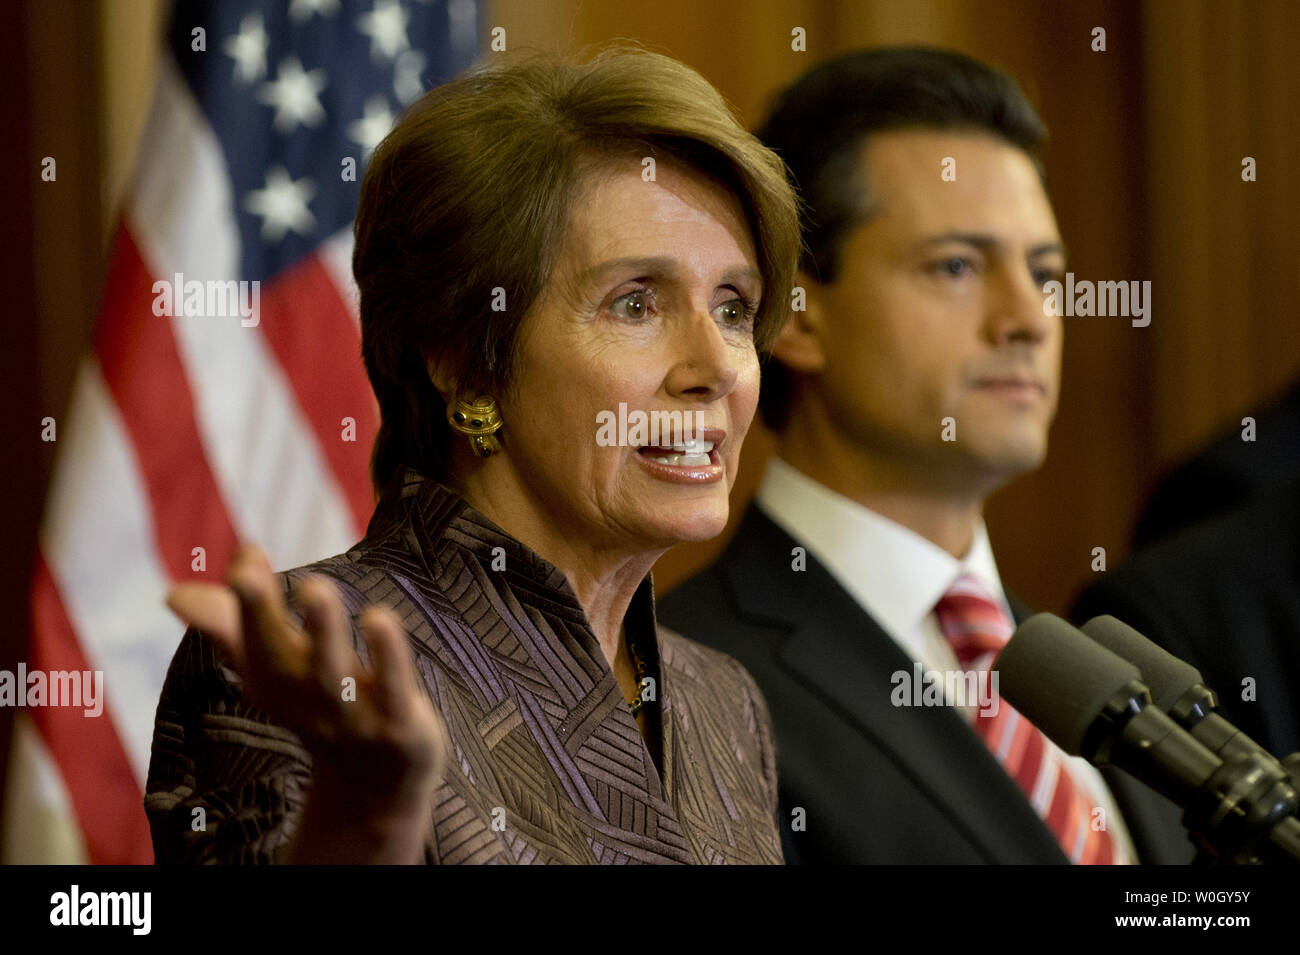 House Minority Leader Nancy Pelosi (D-CA) speaks alongside Mexican President-elect Enrique Pena Nieto during a media availability on Capitol Hill in Washington, DC on November 27, 2012.  UPI/Kevin Dietsch Stock Photo